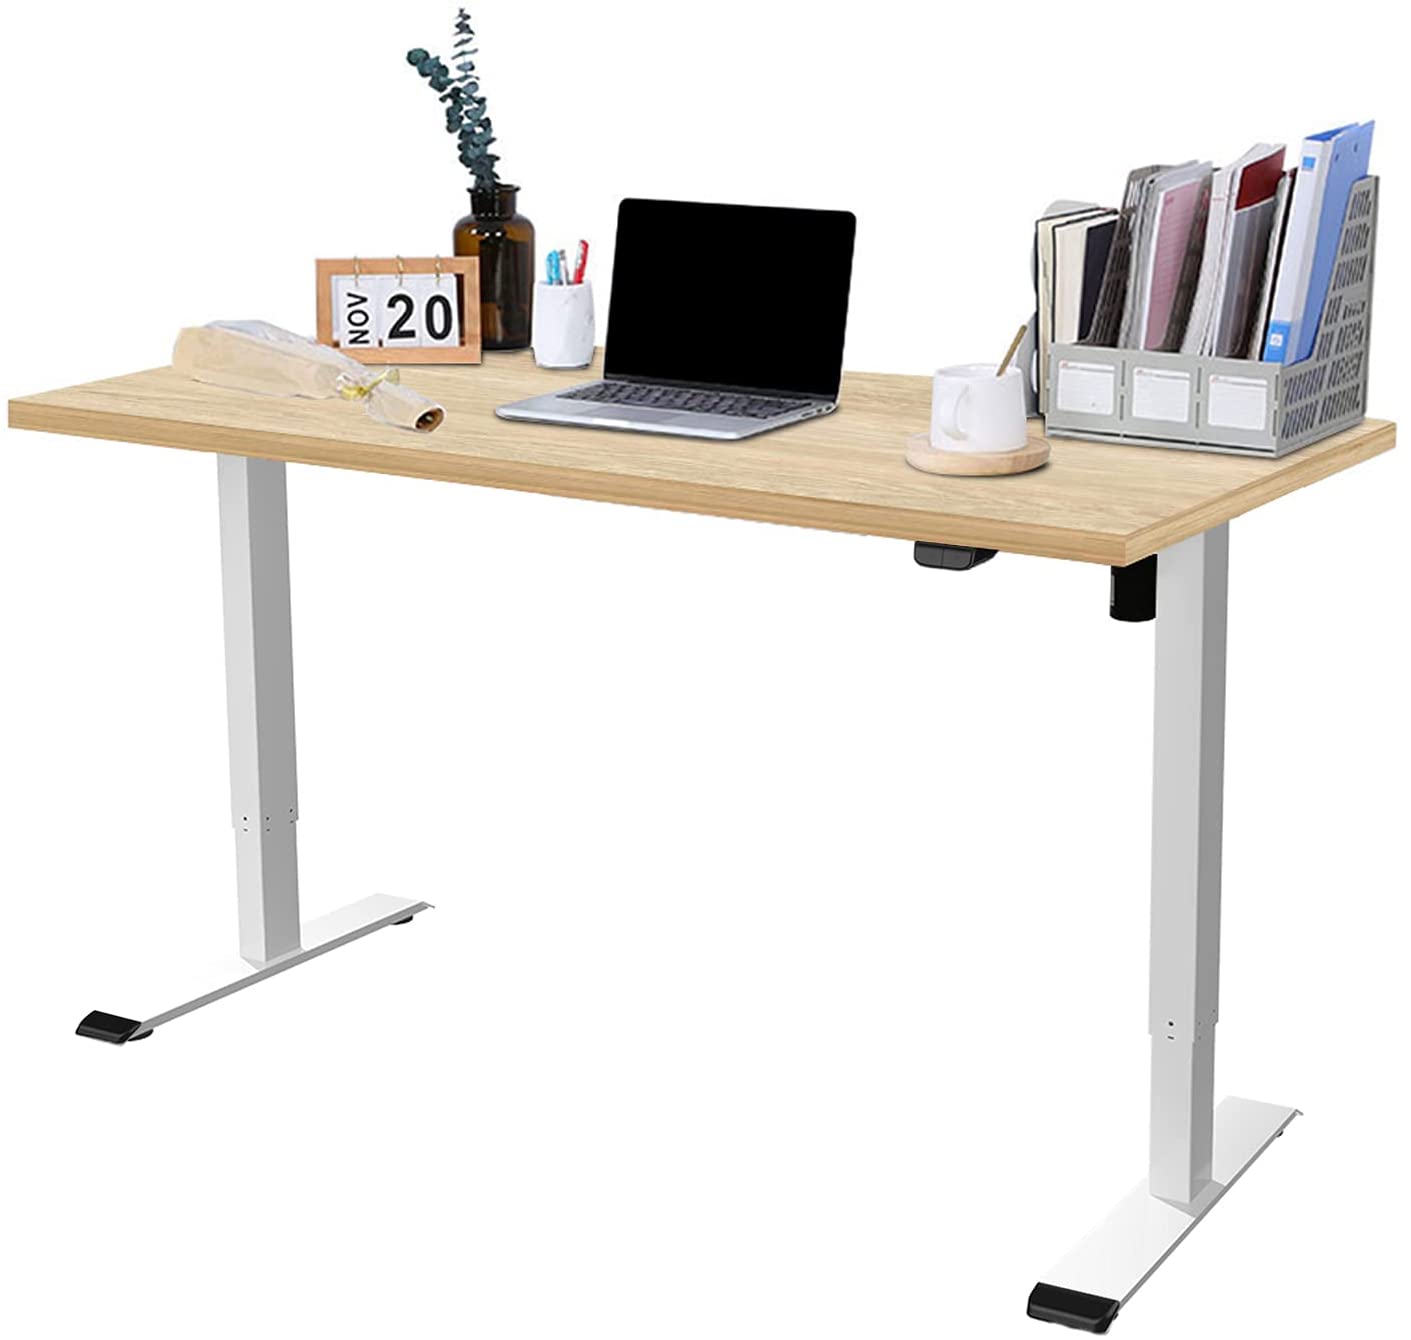 FLEXISPOT Electric Standing Desk product photo from Amazon Black Friday sale